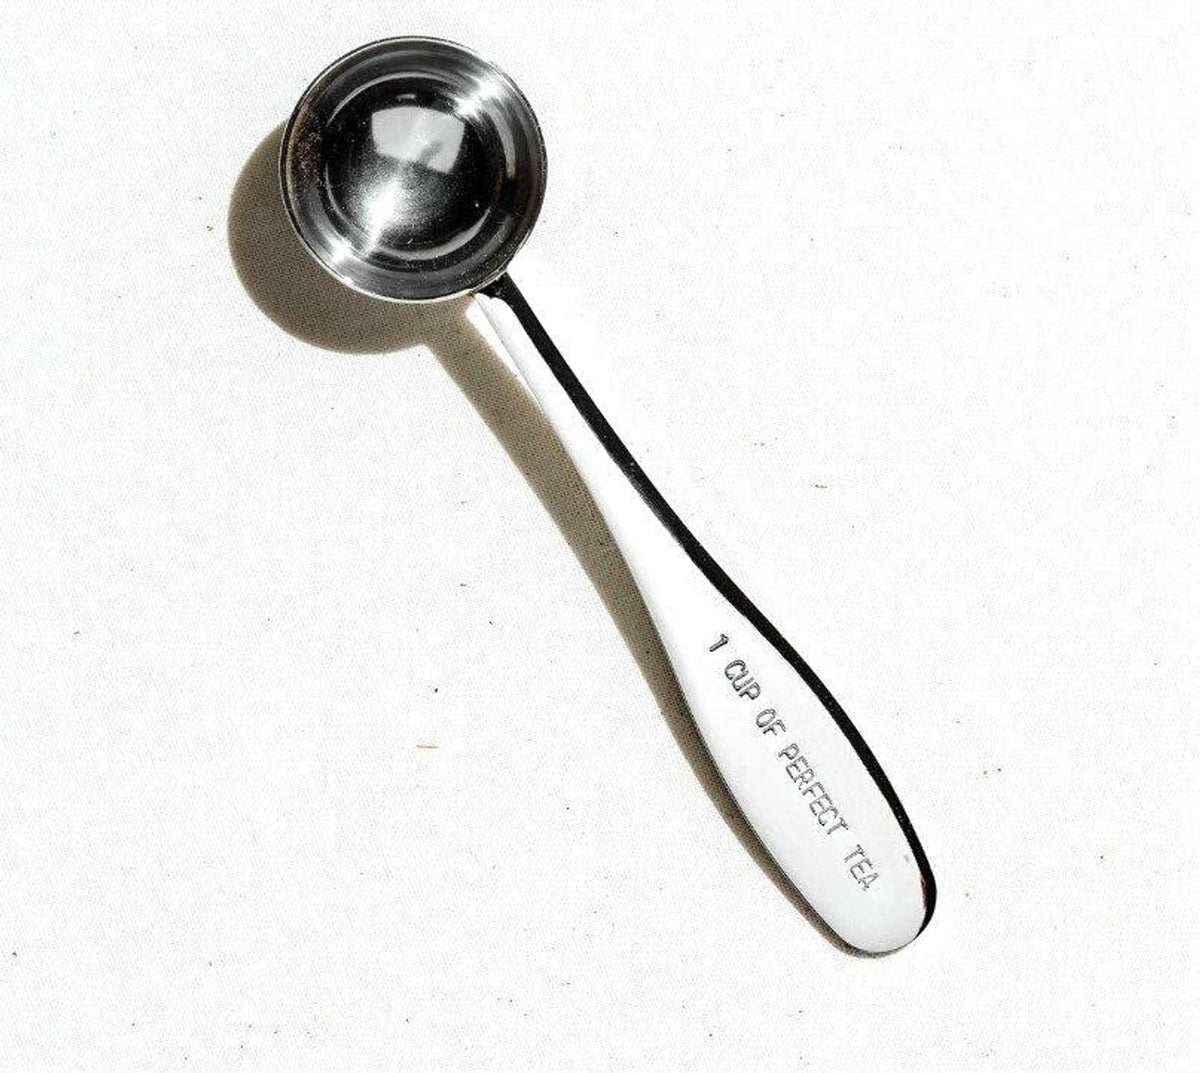 http://www.goodlifetea.com/cdn/shop/products/dethlefsen-and-balk-one-perfect-cup-of-tea-measuring-spoon-stainl-steel-12.5cm-4.92-country-of-origin-china__20246_1200x1200.jpg?v=1680200855